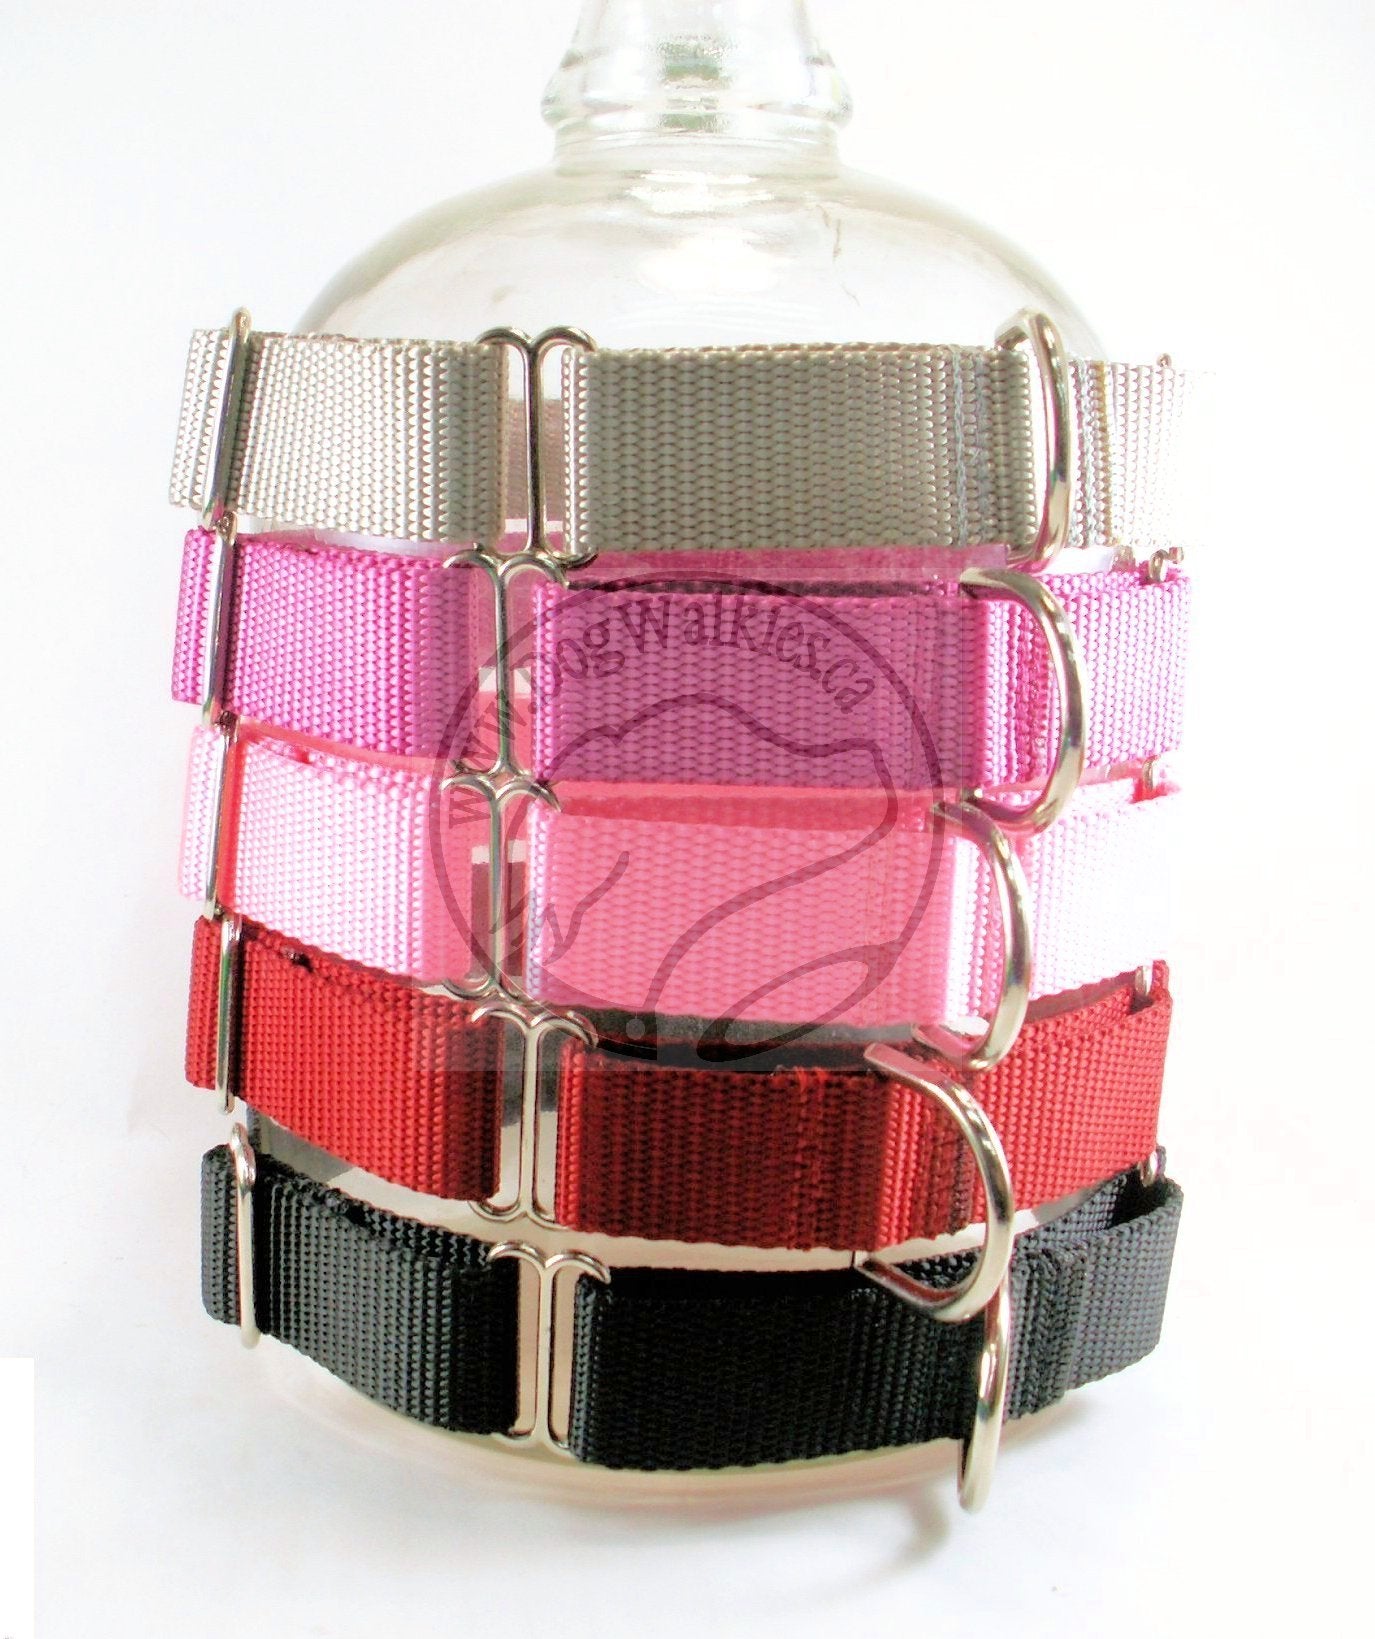 Martingale Dog Collar 1" (25mm) wide; Simple - Elegant - Strong